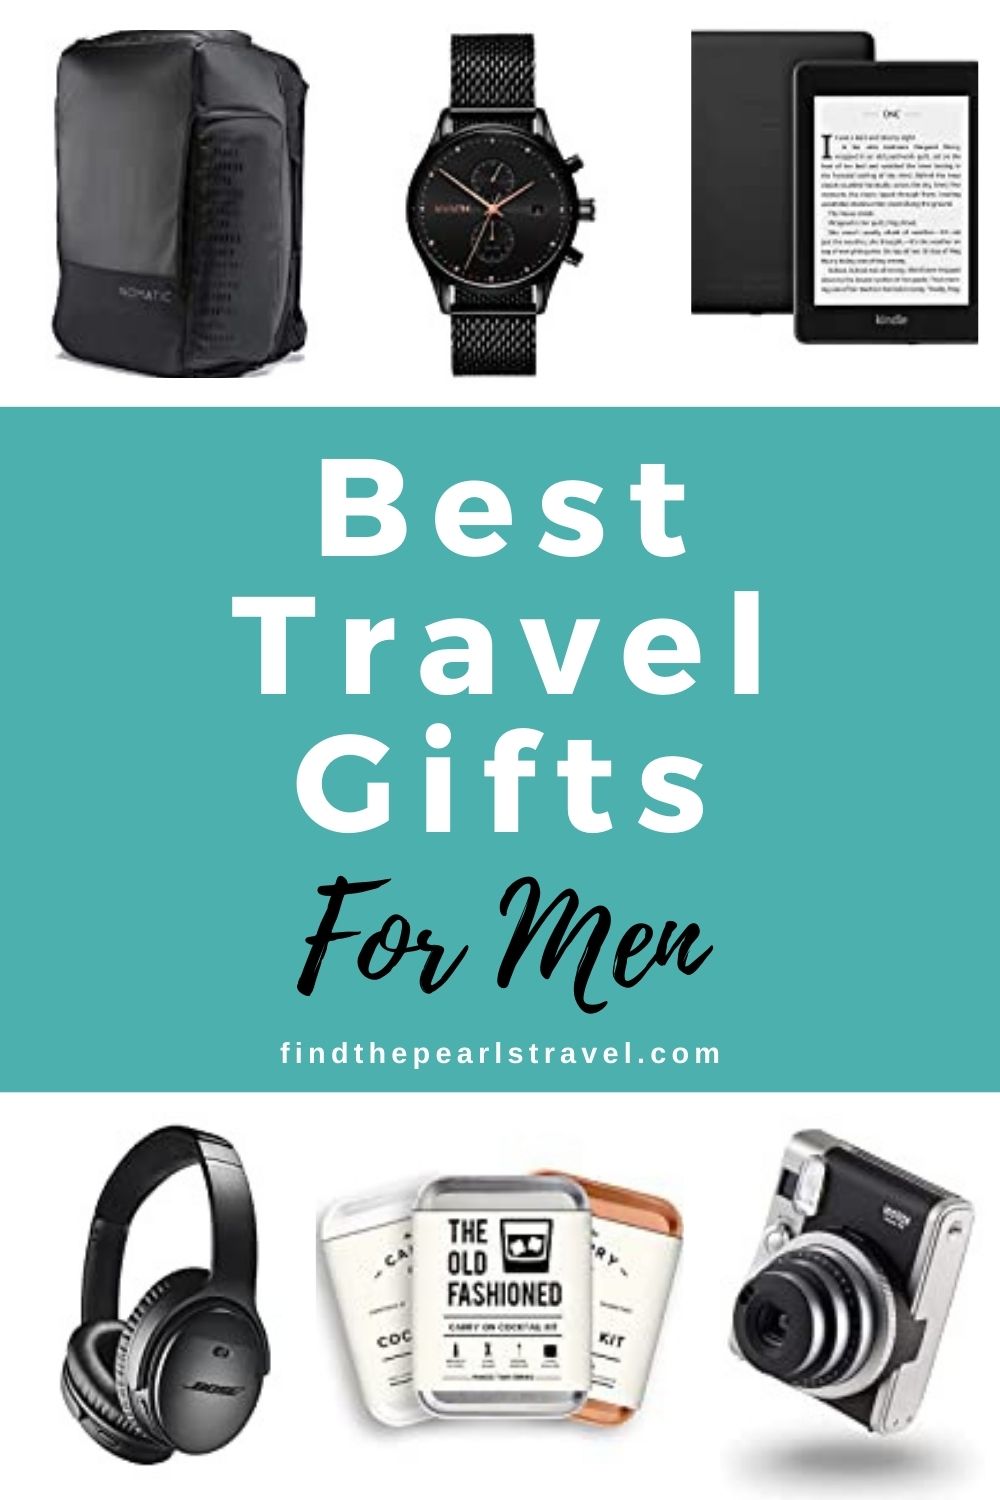 Best Travel Gifts for Men (That He Will Love!): 2020 Gift Guide | Find The Pearls Travel